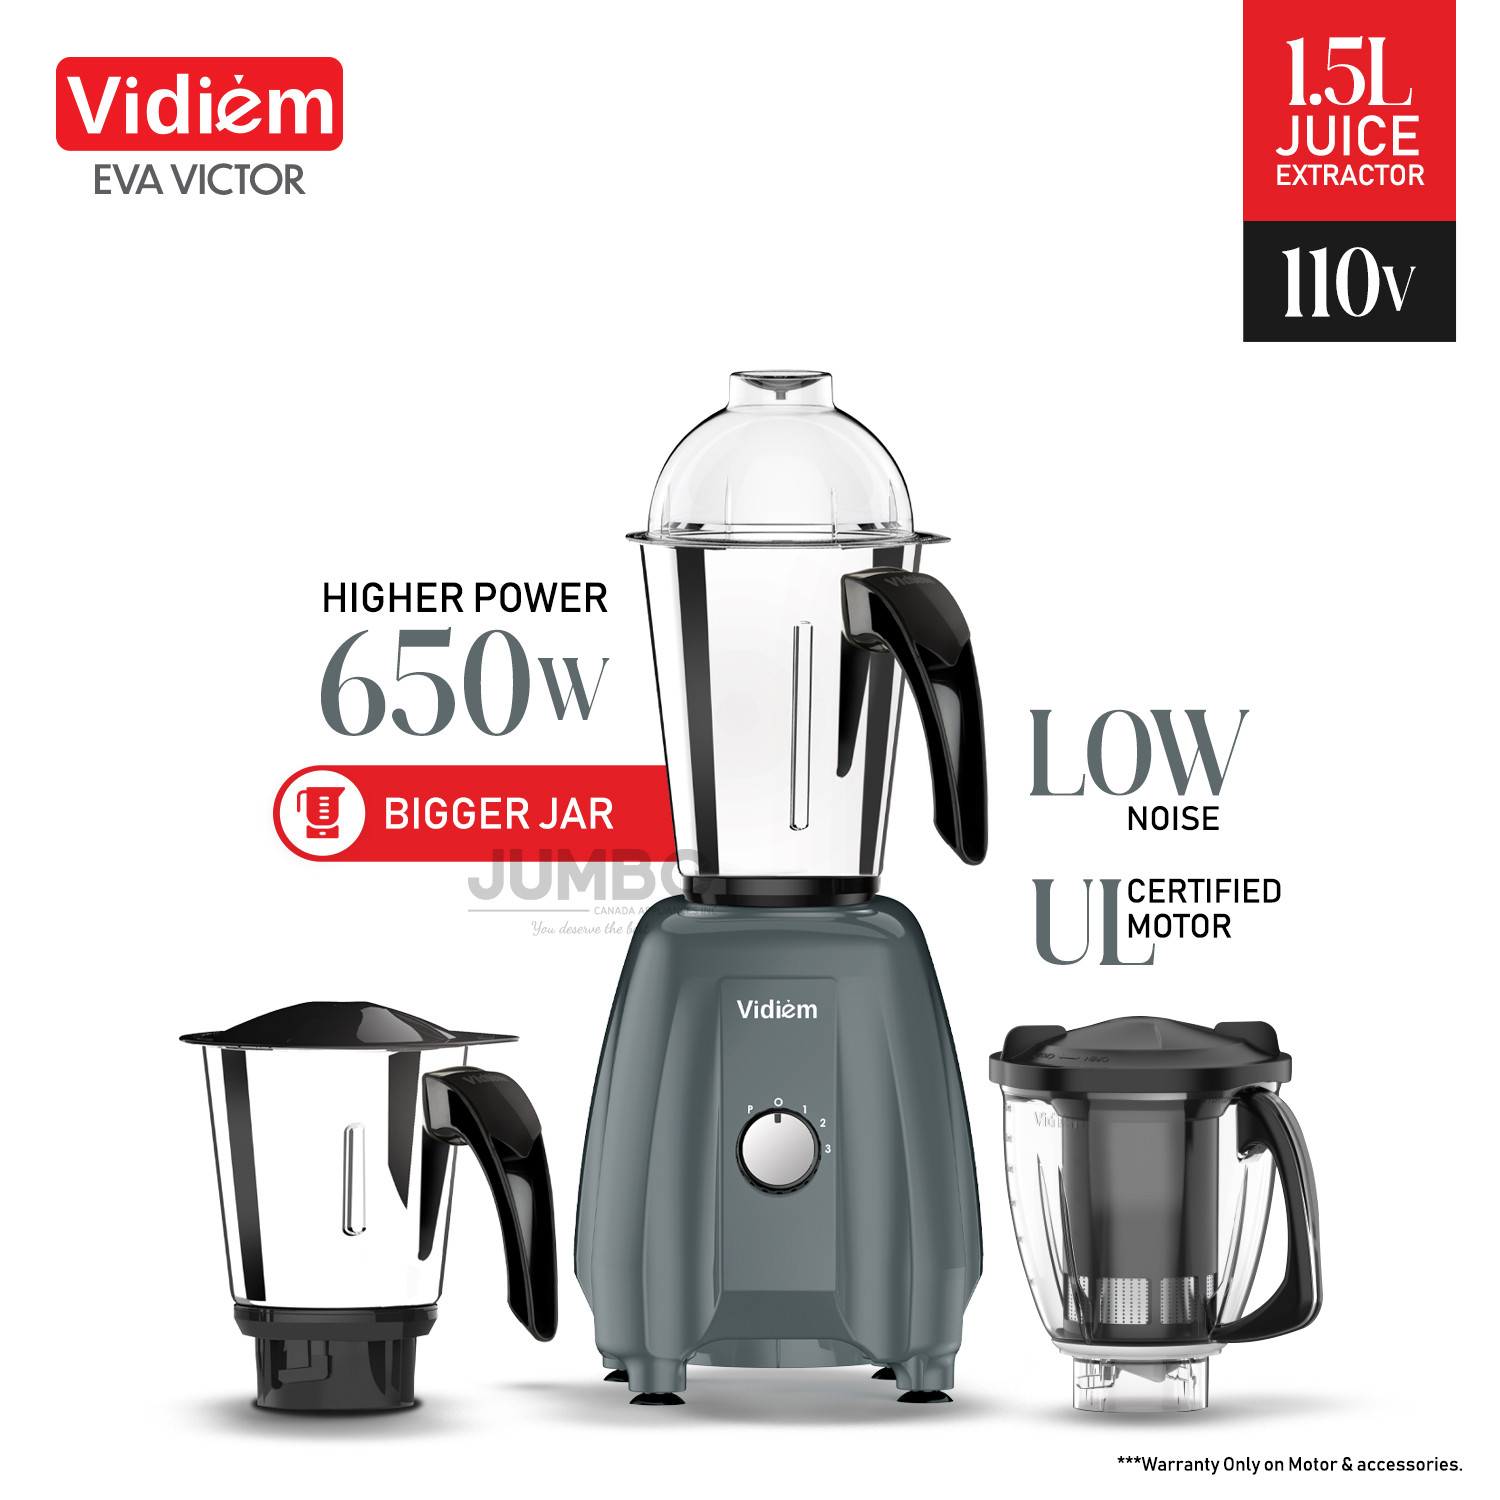 vidiem-eva-victor-650w-110v-stainless-steel-jars-indian-mixer-grinder-spice-coffee-grinder-for-use-in-canada-usa1